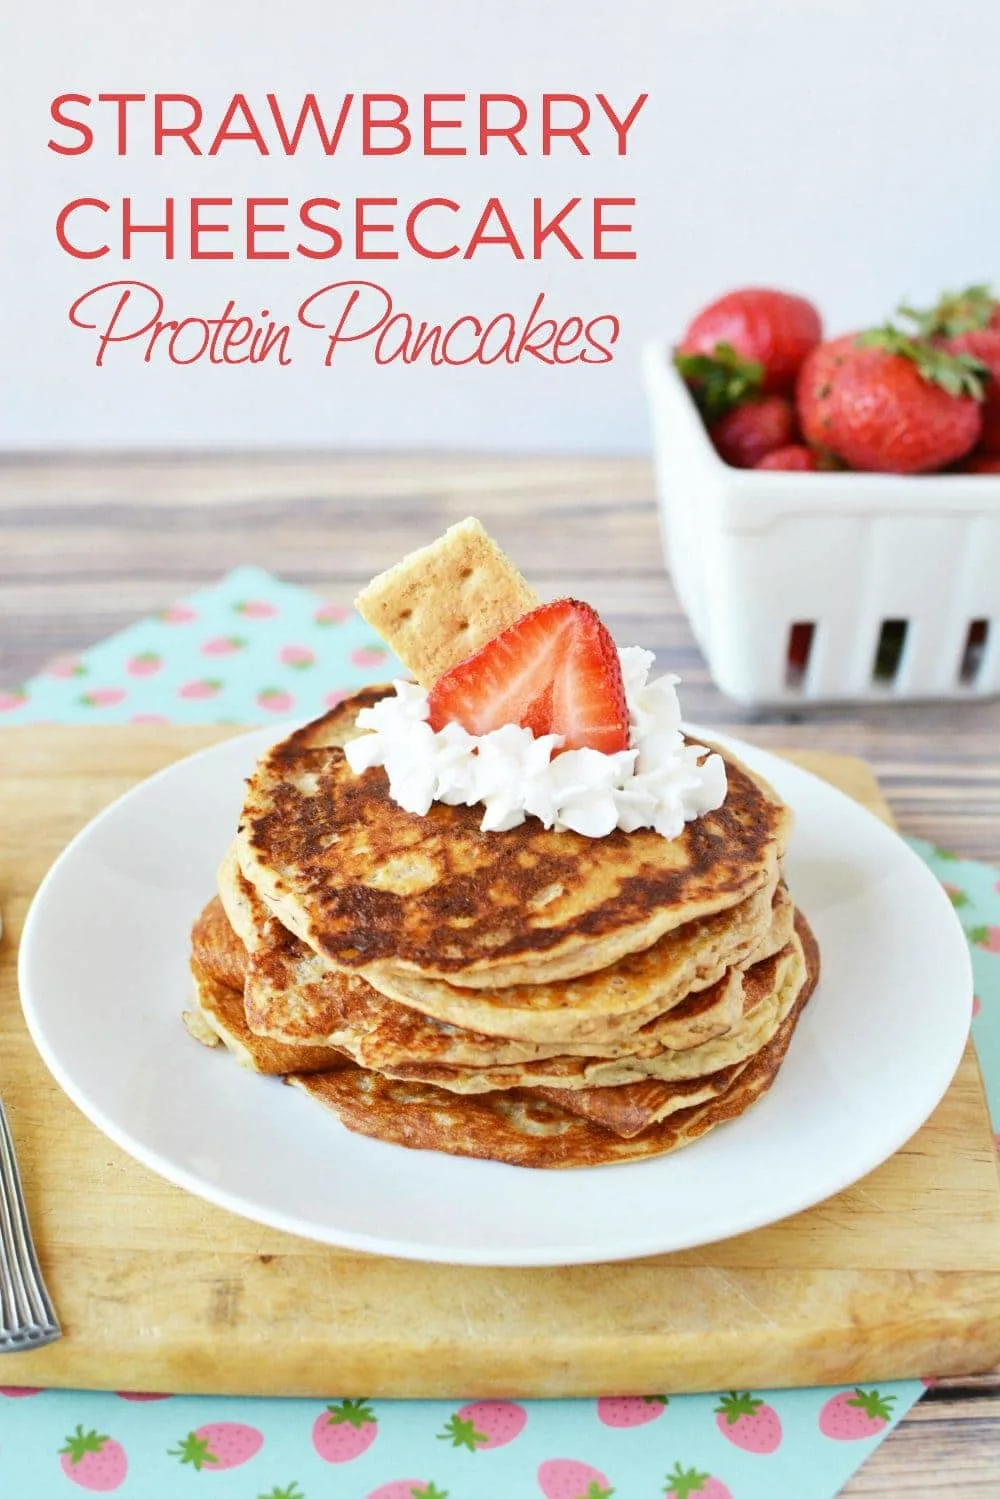 Pancakes with whipped cream and strawberry on top